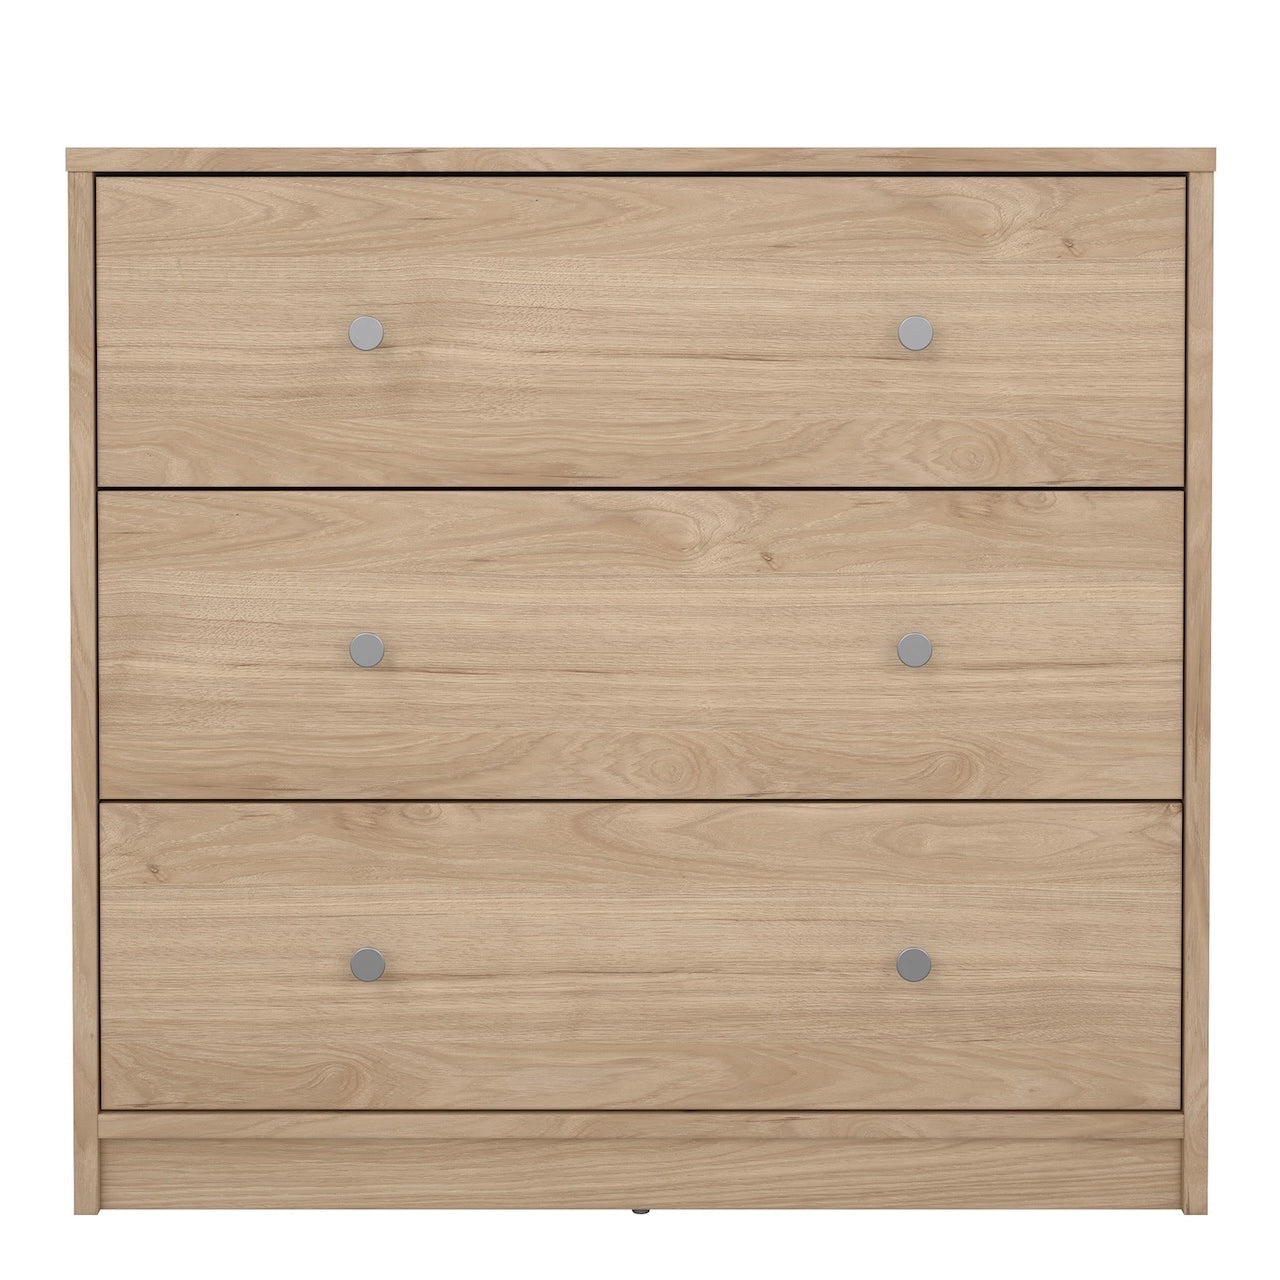 Furniture To Go May Chest of 3 Drawers in Jackson Hickory Oak